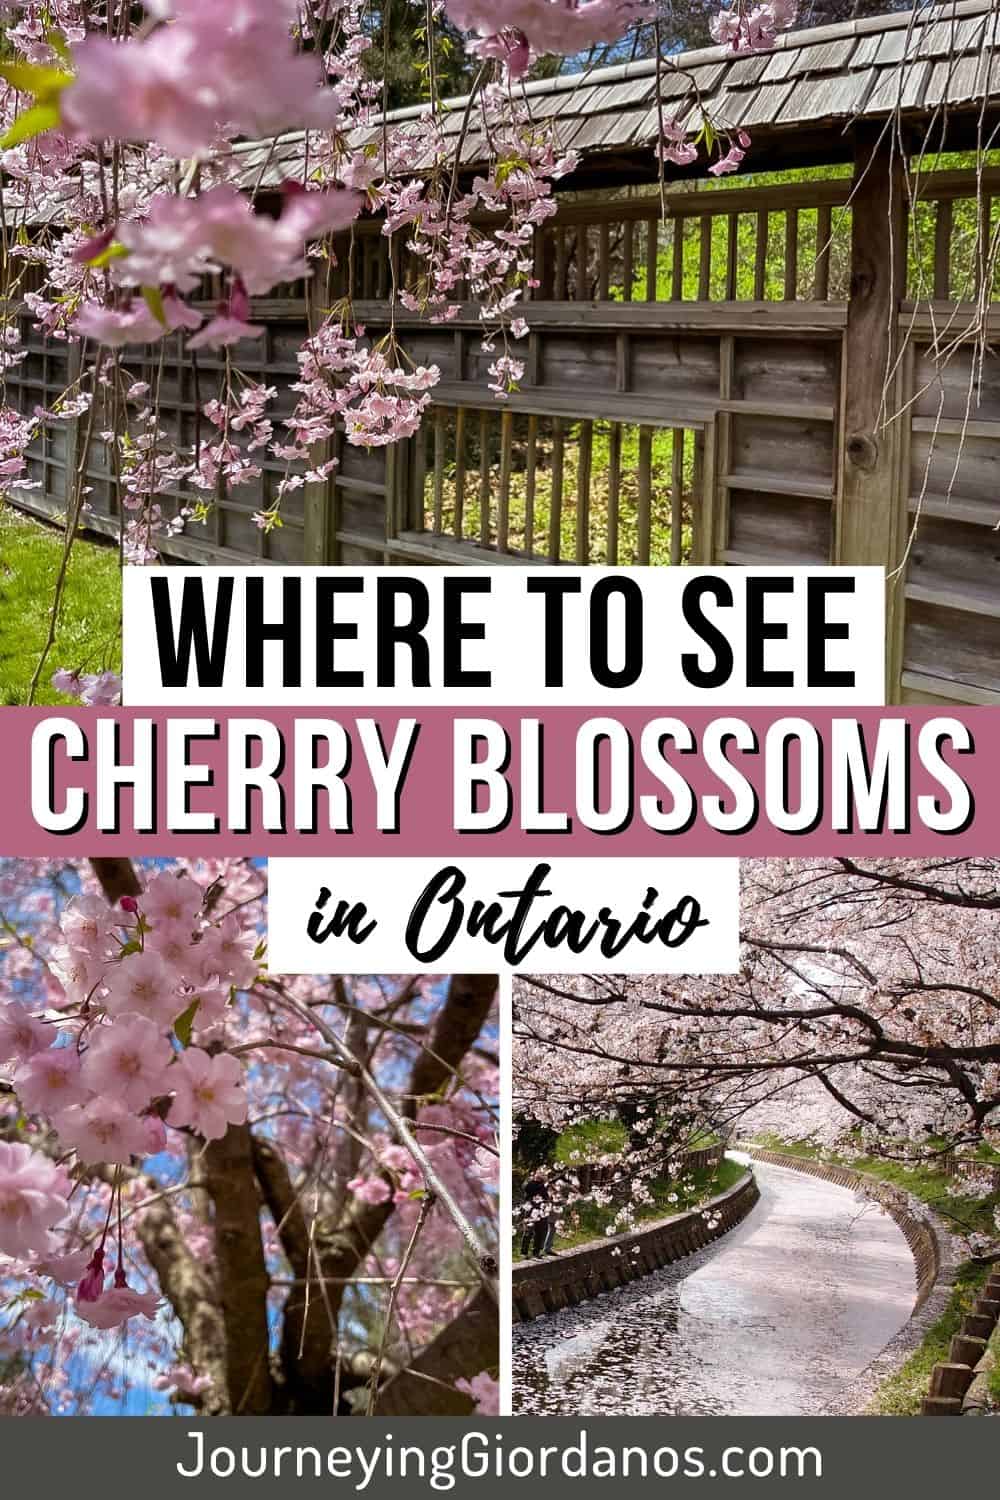 Where-to-See-Cherry-Blossoms-in-Ontario-Pinterest-Pin-1